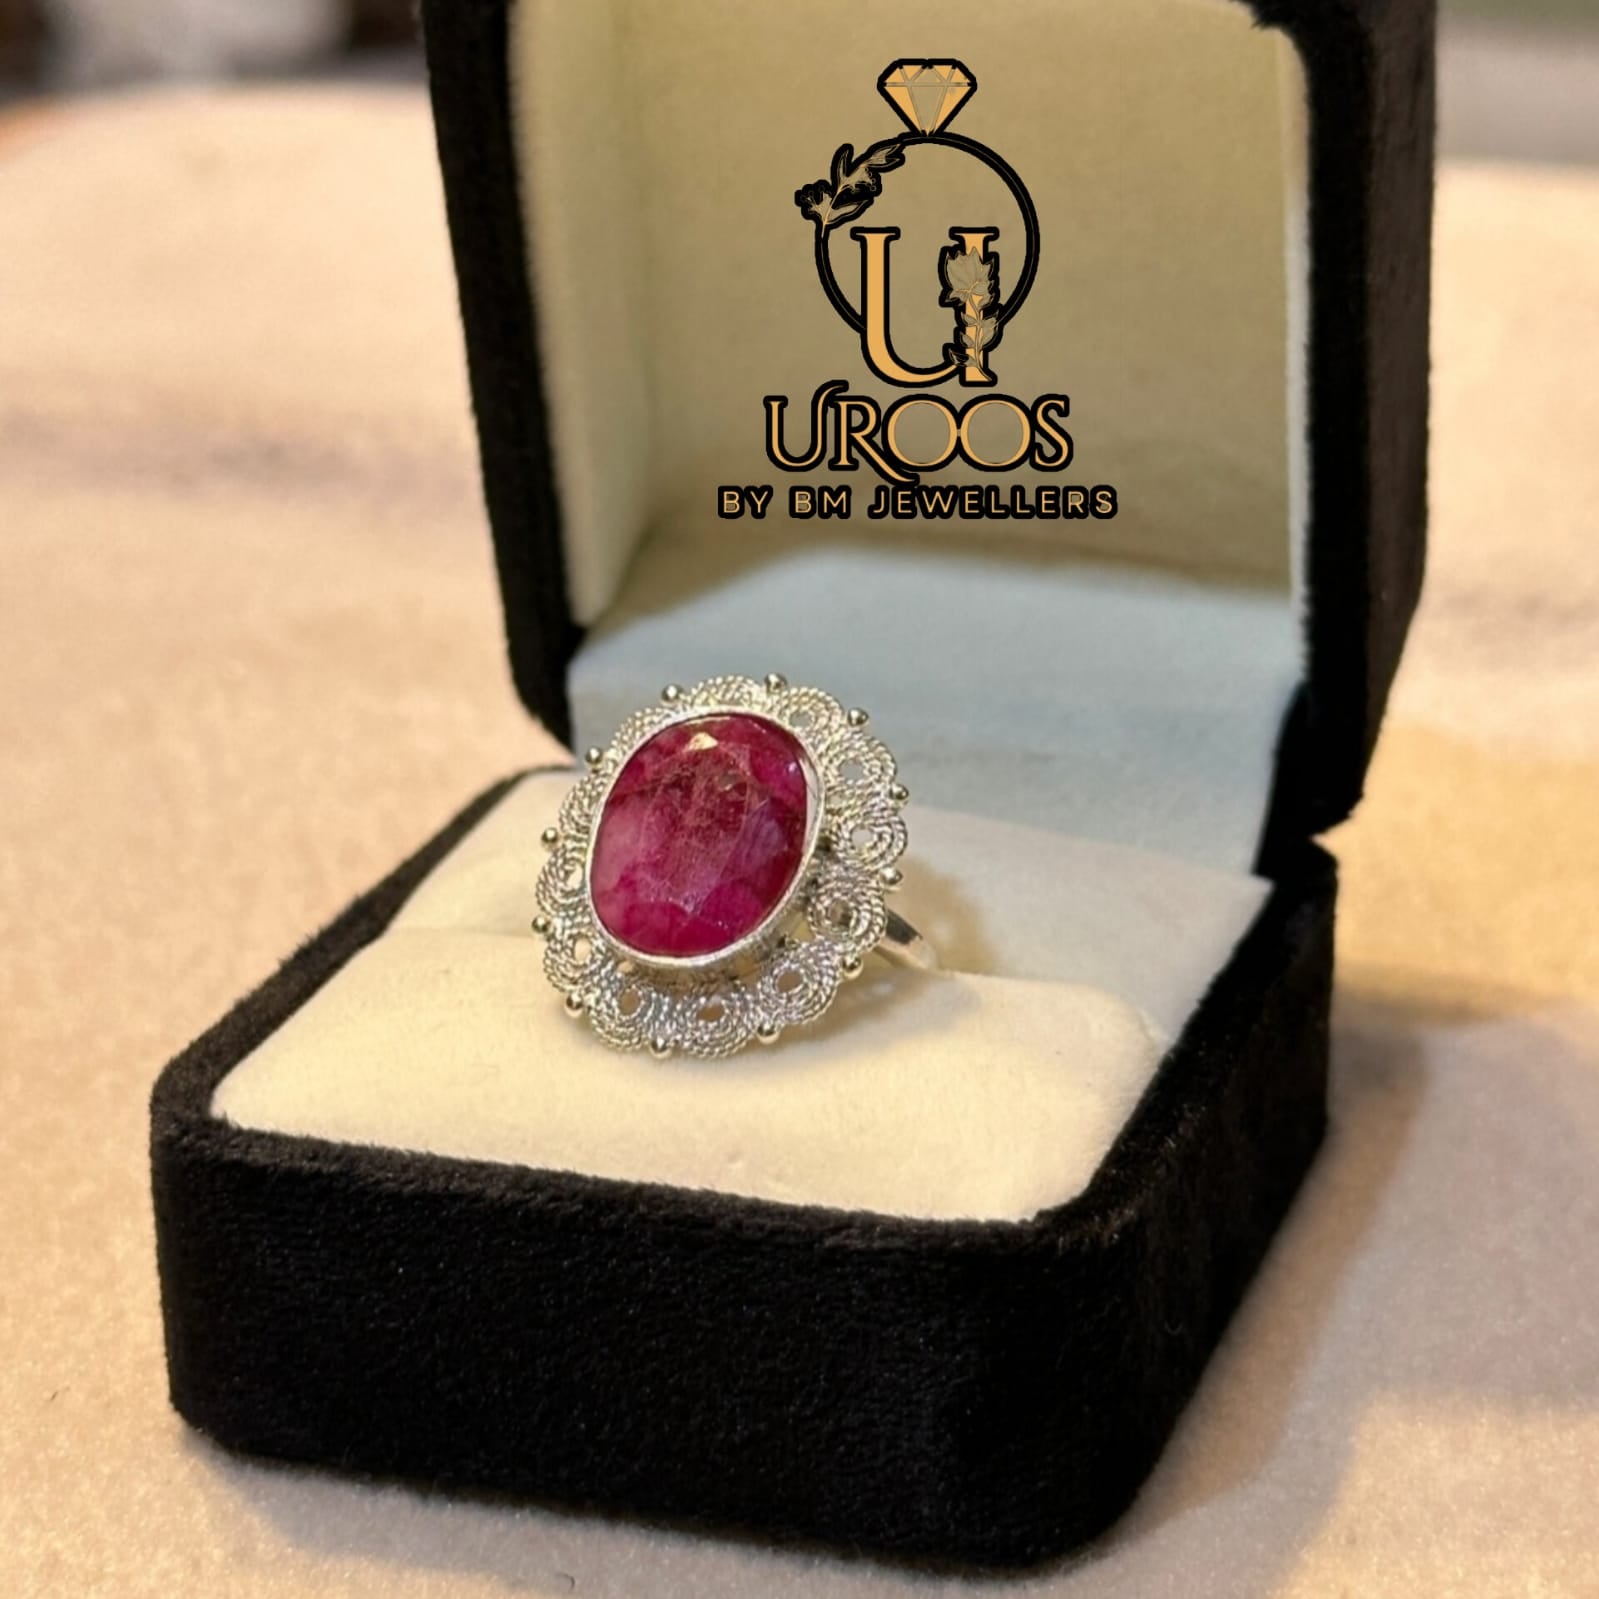 Handmade Madrasi Style Silver Ring adorned with Ruby Stone